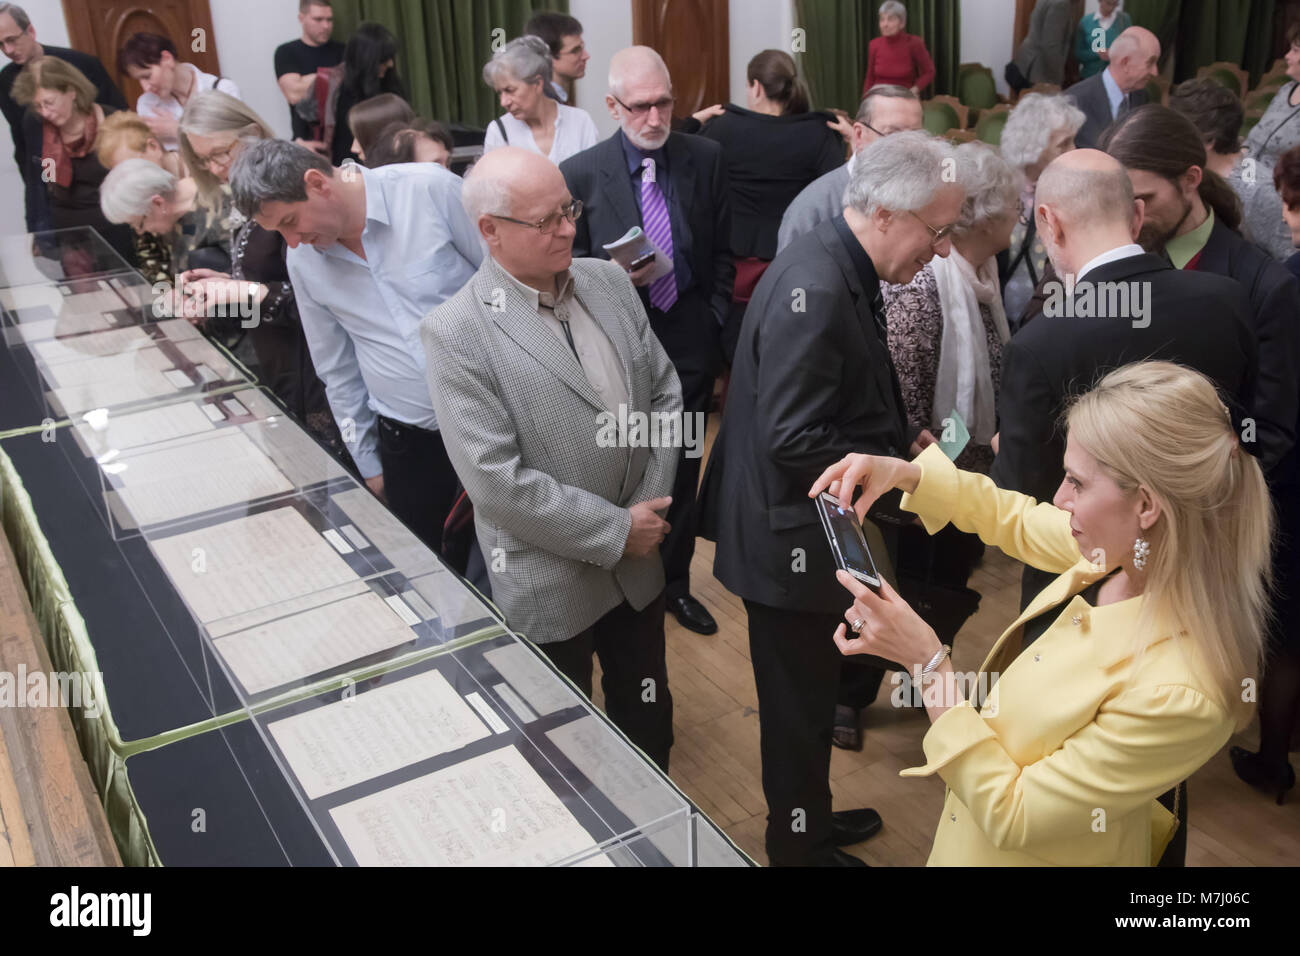 Budapest, Hungary. 10th Mar, 2018. People view Hungarian composer Franz Liszt's manuscripts which are previously thought lost in the Franz Liszt Memorial Museum and Research Center in Budapest, Hungary, on March 10, 2018. The manuscripts believed to be of famous Hungarian composer Franz Liszt were presented in the museum on Saturday in a solemn ceremony. Credit: Attila Volgyi/Xinhua/Alamy Live News Stock Photo